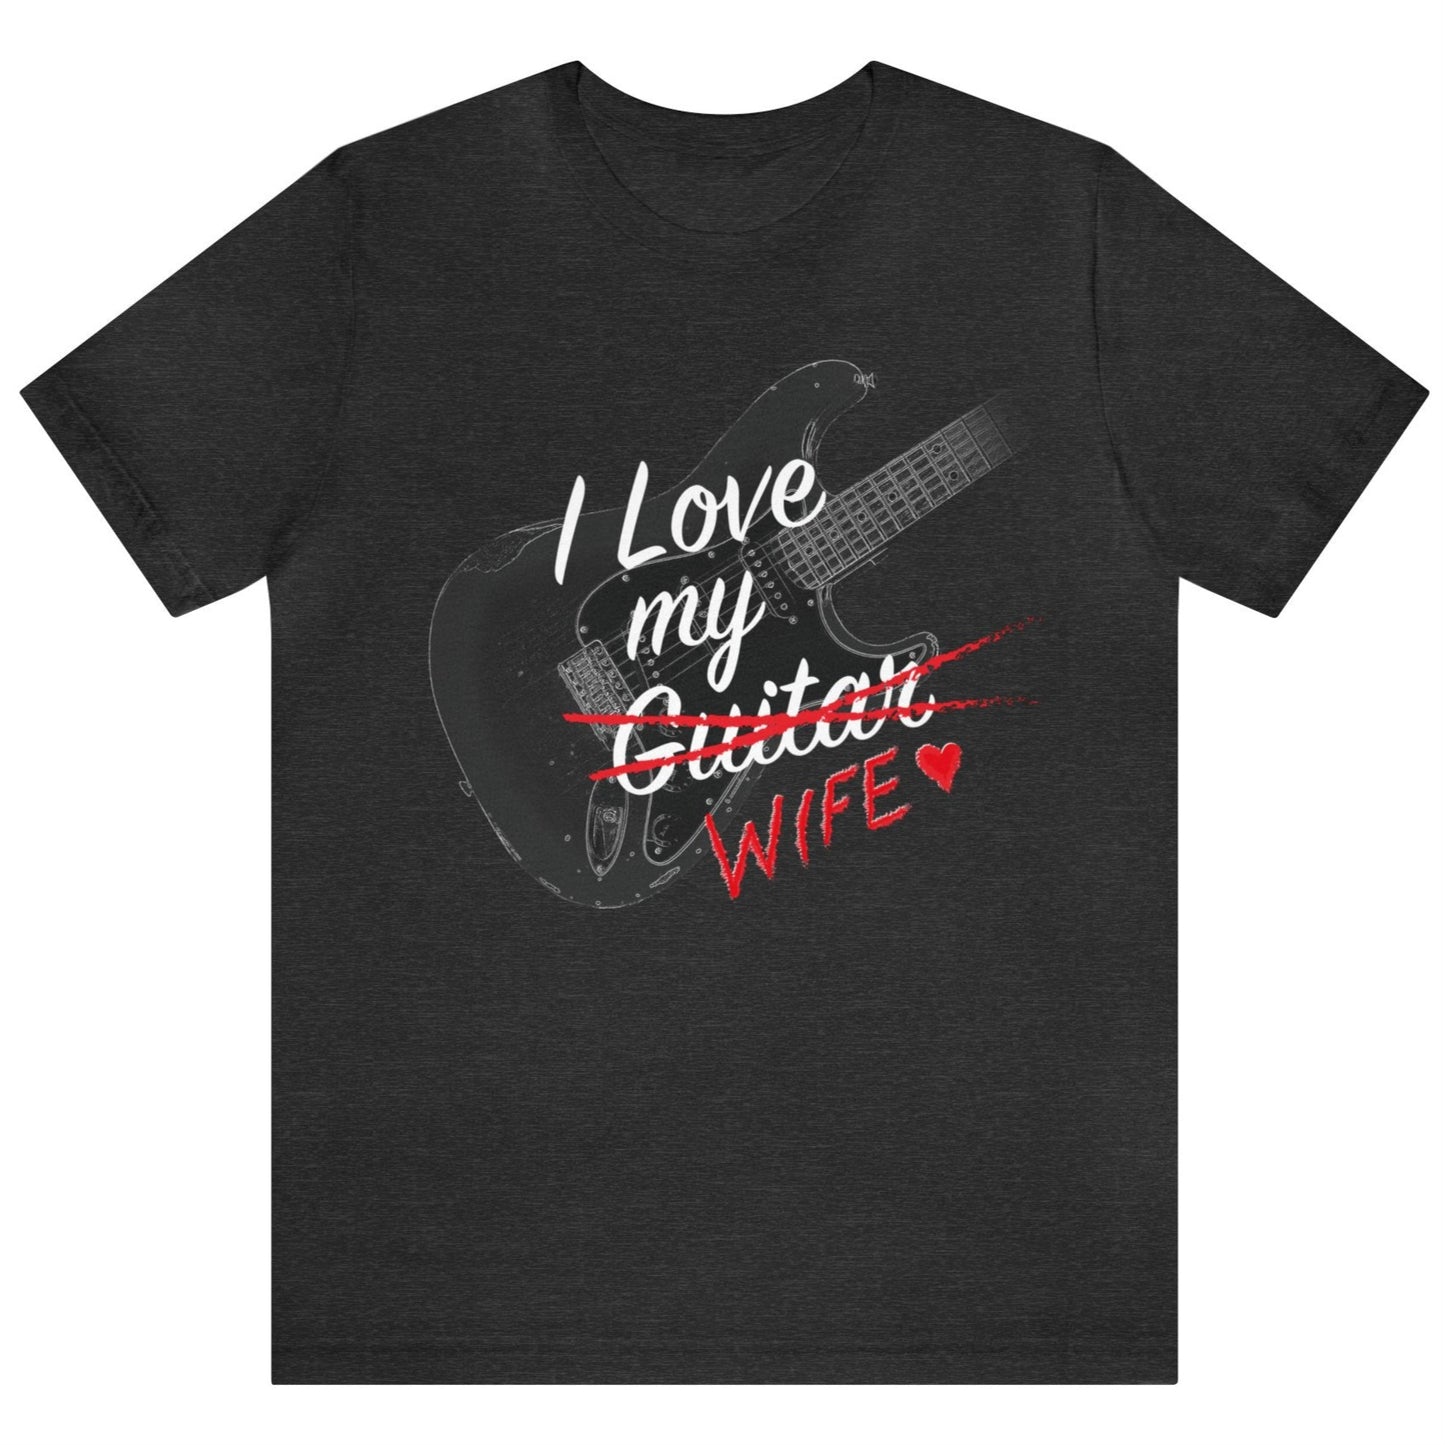 I LOVE My WIFE (Guitar), Valentine's Day Gift, Husband T-Shirt, Stratocaster on Unisex Bella+Canvas Tee, Unisex, Gift for guitarist